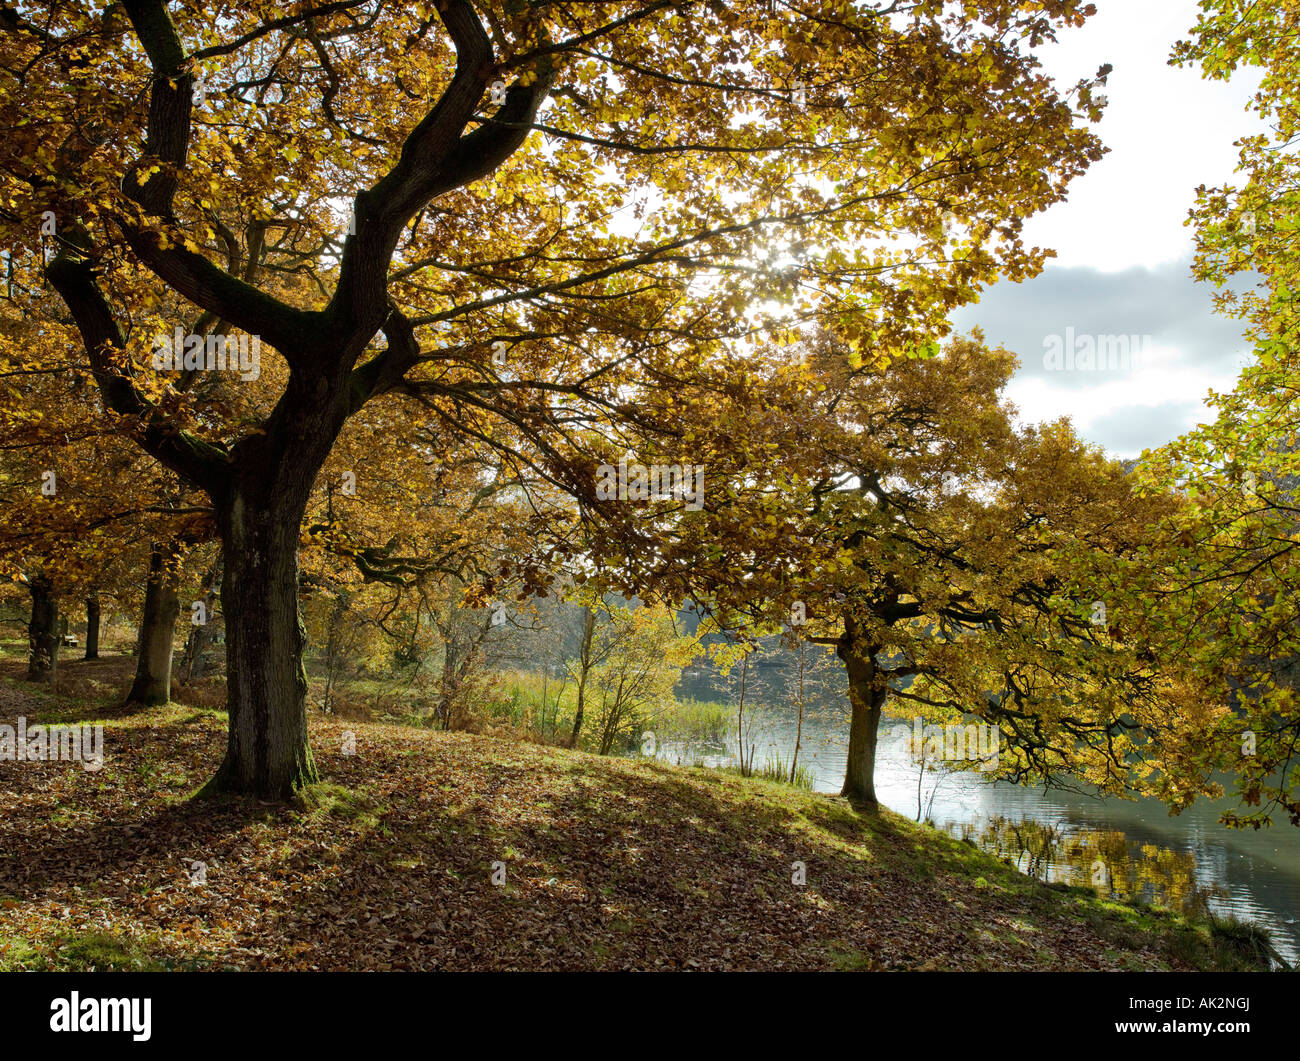 HERBST FARBEN ROYAL FOREST OF DEAN GLOUCESTERSHIRE Stockfoto